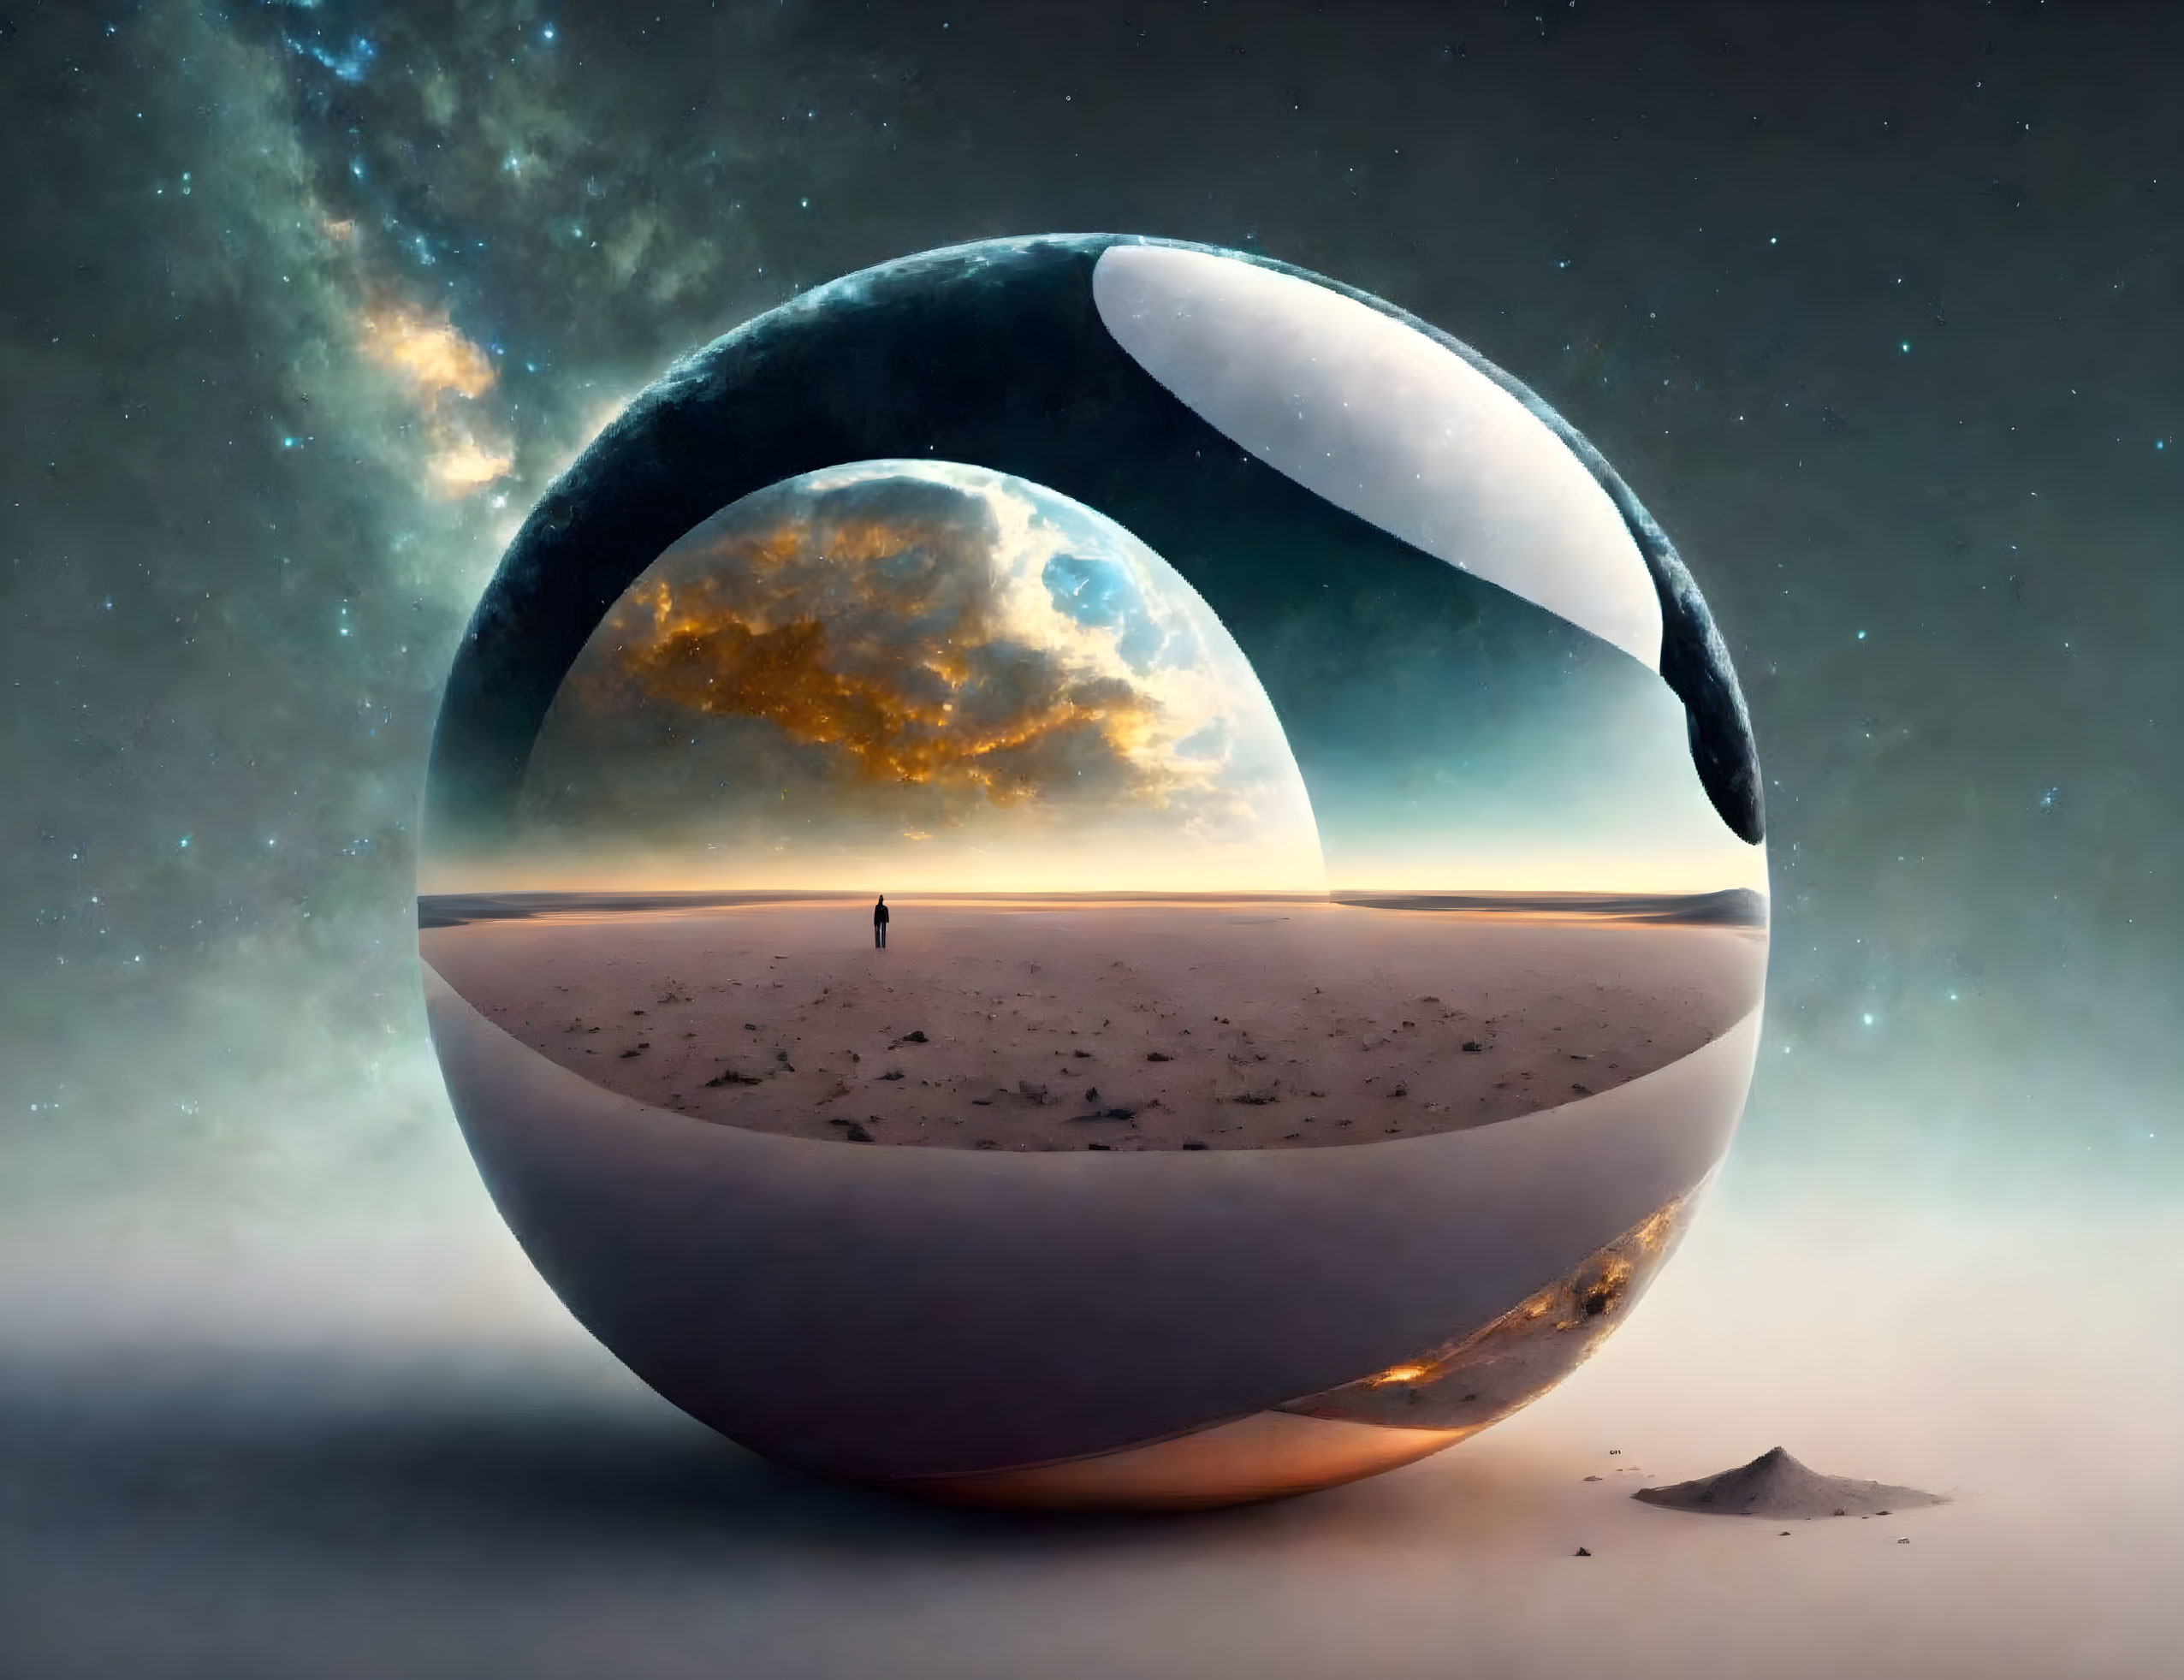 Surreal landscape with person and reflective sphere in starry sky and sunset contrast